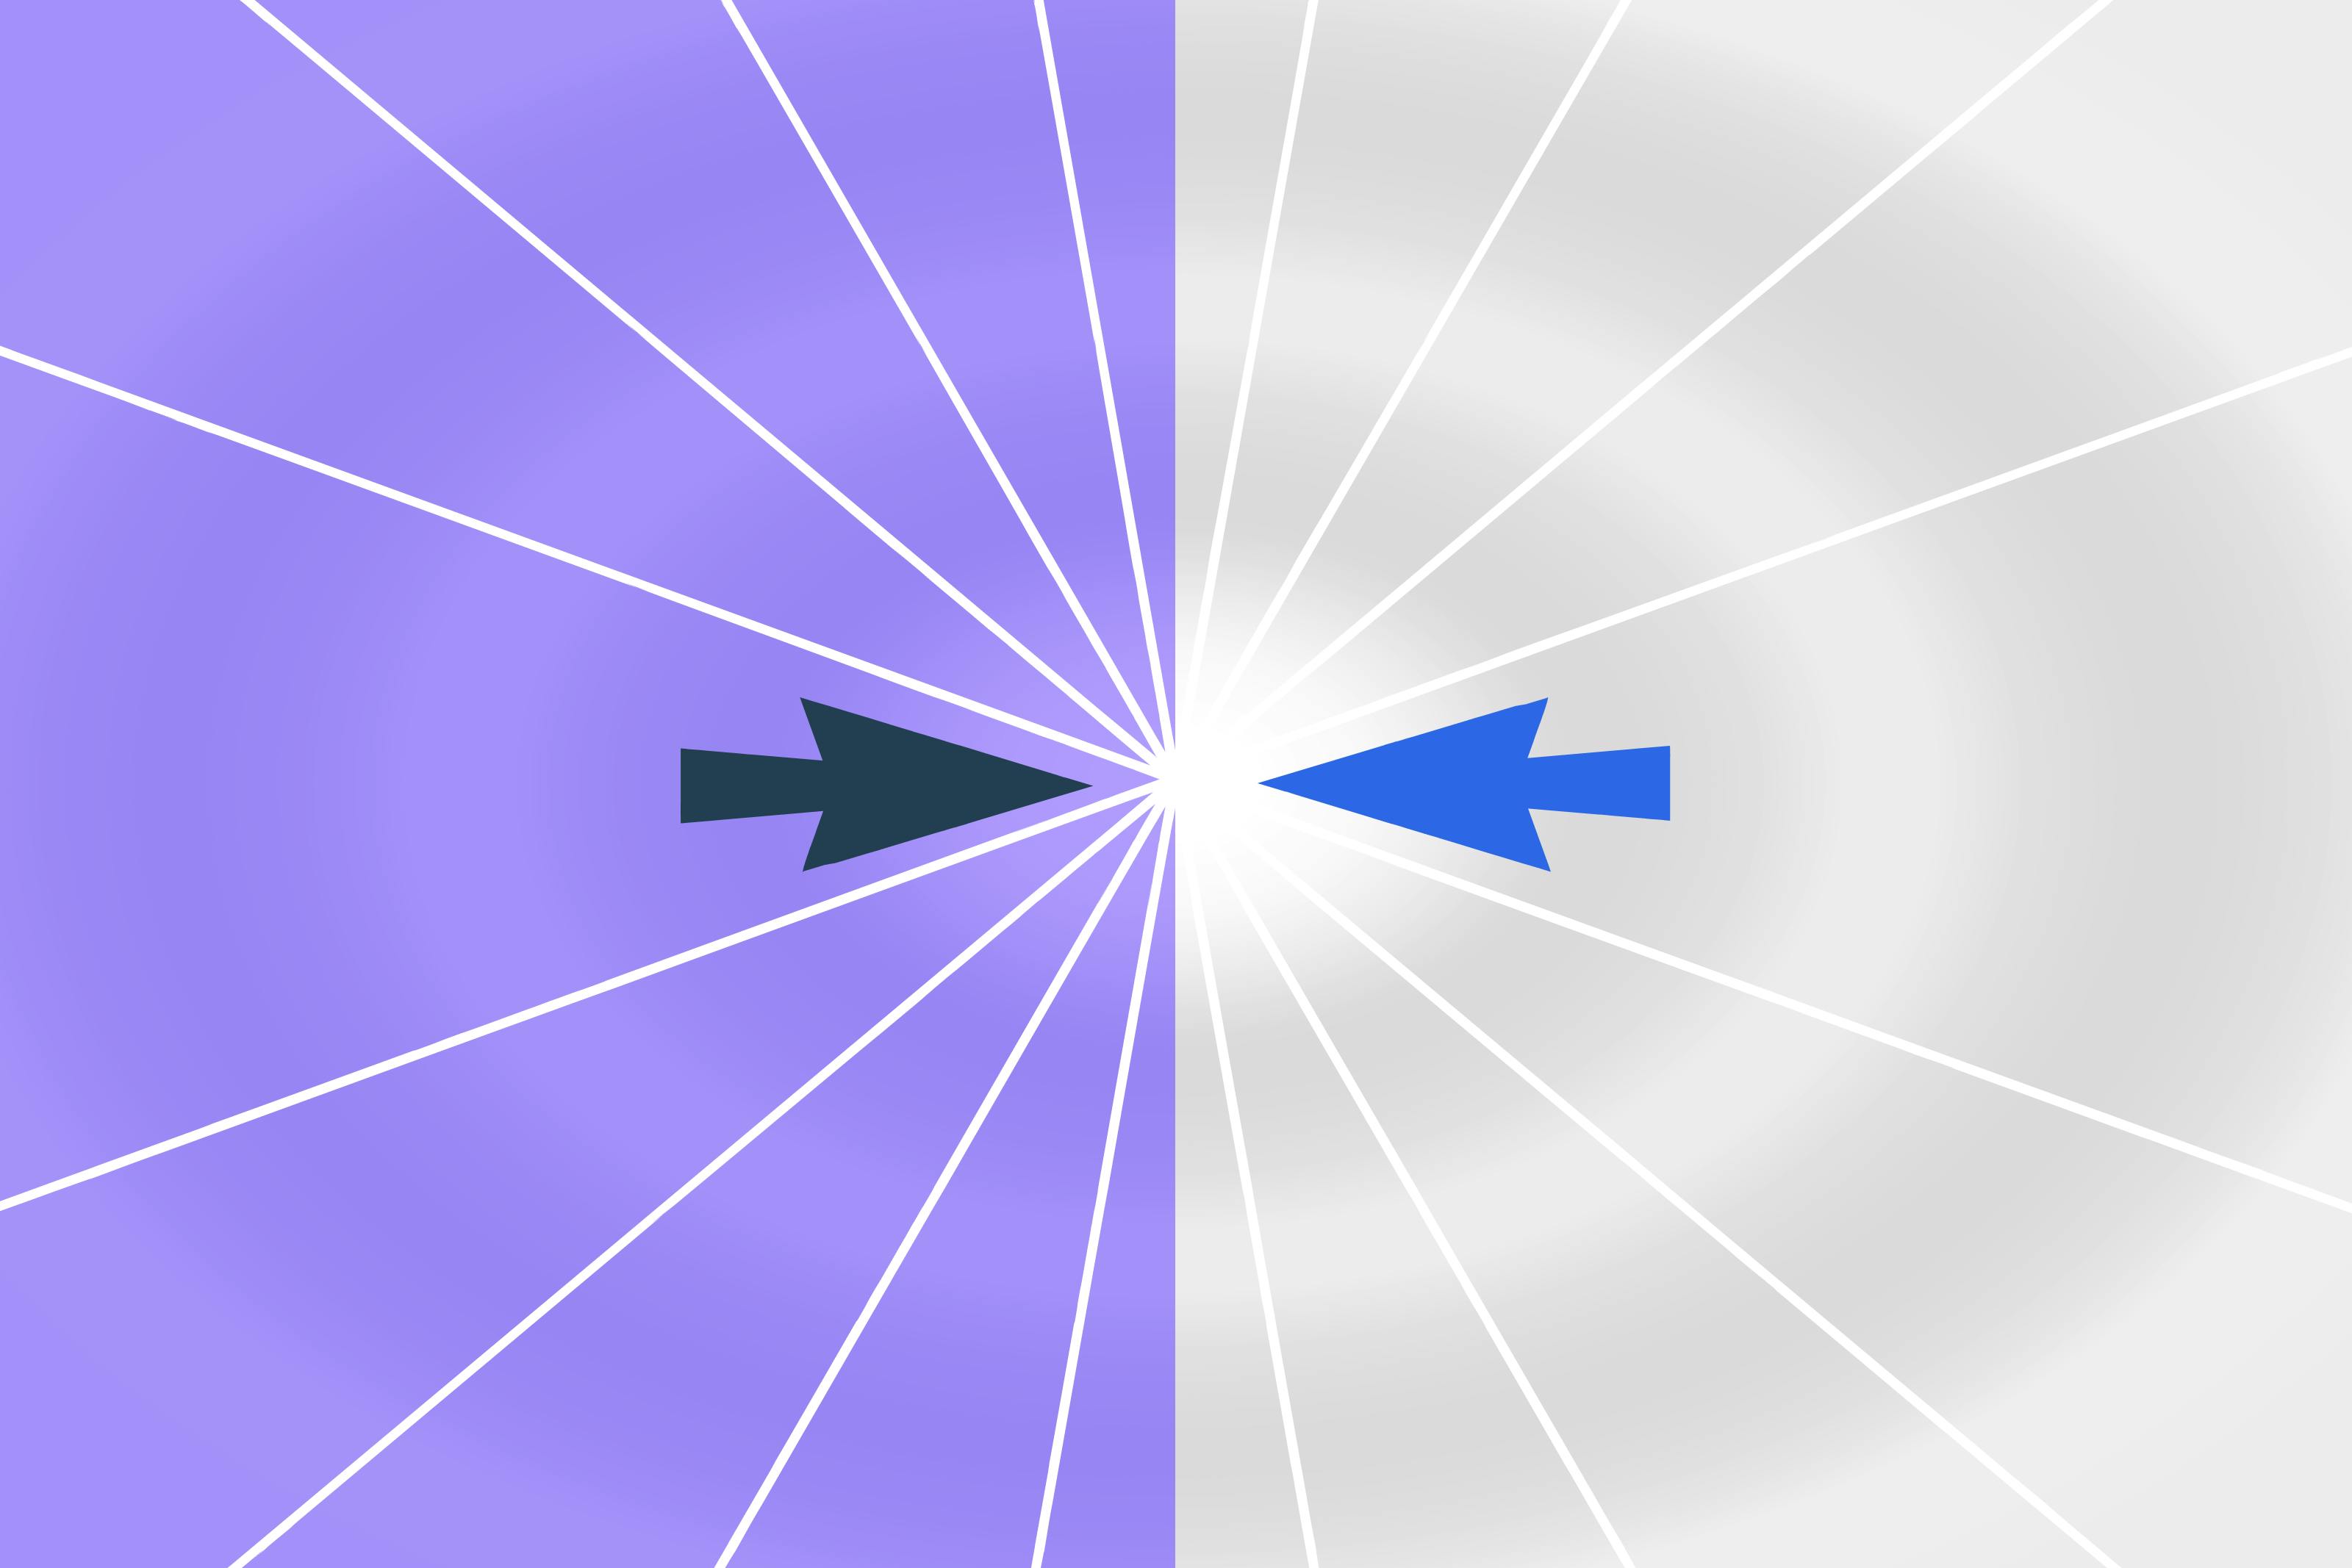 a rectangle is split vertically down the middle into a purple half (left) and a white half (right). there is a spot of light radiating out of the centre of the image, on the centre line. to the right of the light is a blue arrow, to the left of the light is a black arrow. they both face inwards toward the light (and each other)